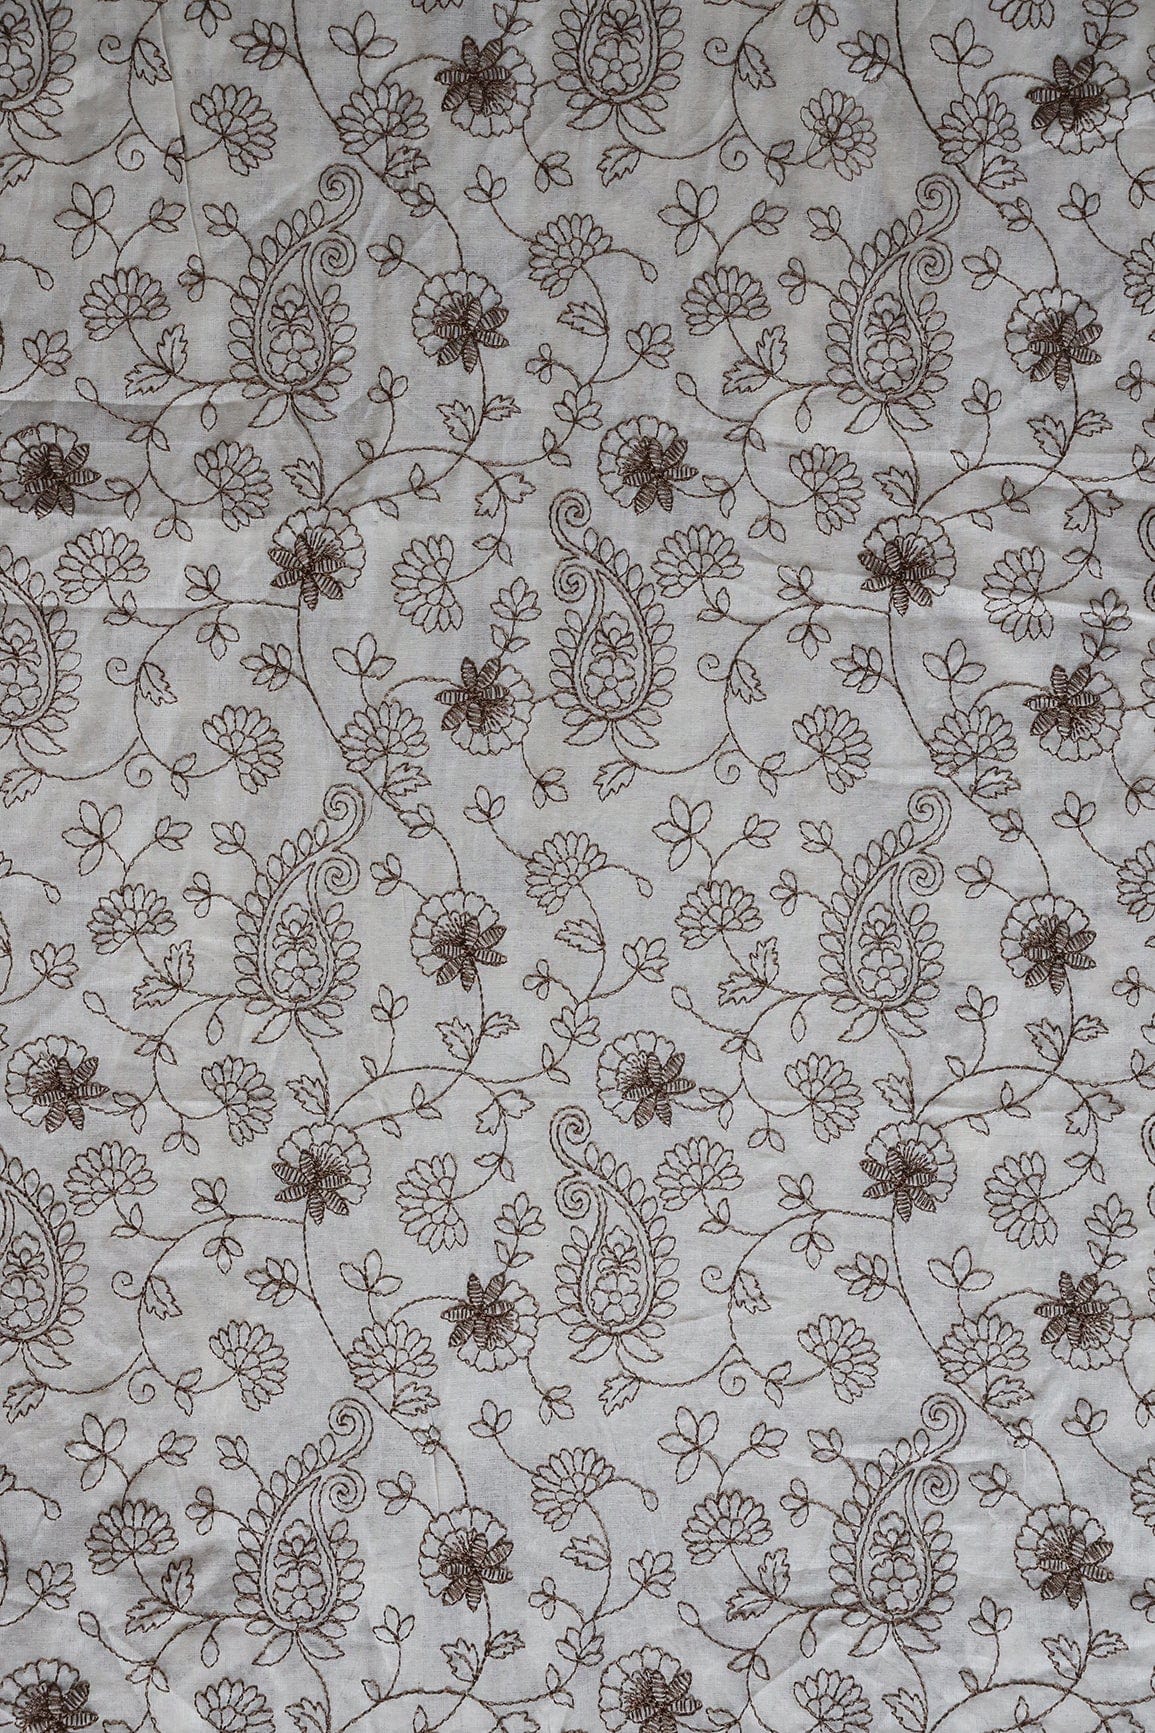 doeraa Embroidery Fabrics Beautiful Brown Thread Floral Embroidery Work On White Organic Cotton Fabric